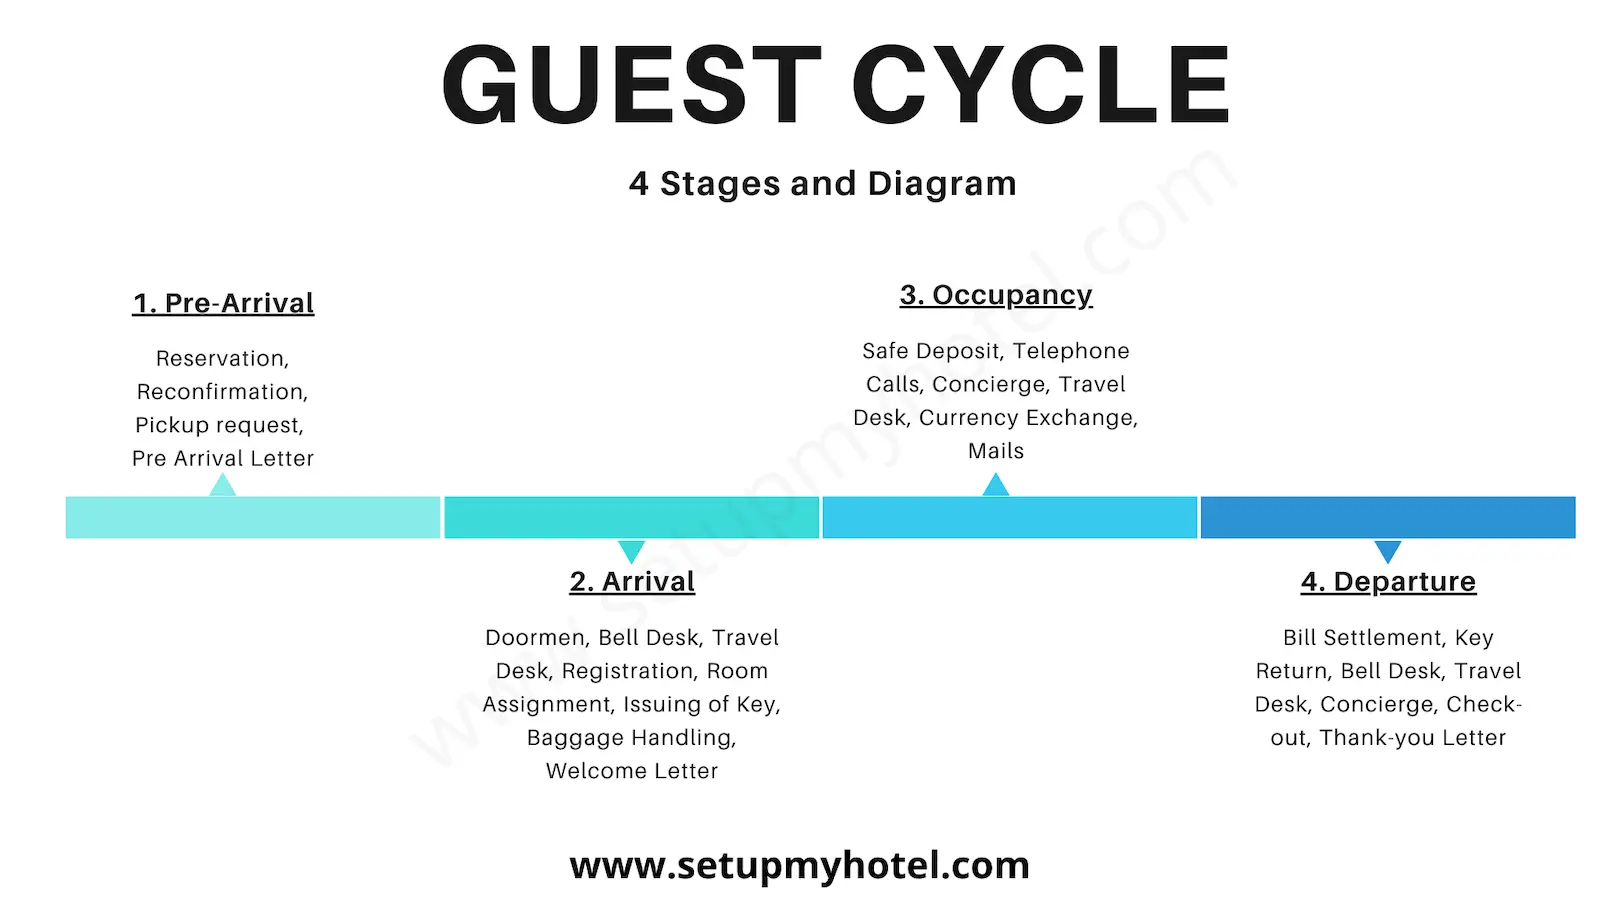 The Guest Cycle in a hotel refers to the various stages that a guest goes through during their stay. There are typically four stages in the guest cycle, which include pre-arrival, arrival, occupancy, and departure. During the pre-arrival stage, the guest makes their reservation, provides their personal information, and requests any special accommodations they may need. This stage is crucial as it sets the tone for the guest's entire stay. The arrival stage is when the guest physically arrives at the hotel and checks in. During this stage, the guest is greeted by the front desk staff, who verify their reservation and provide them with their room key and any additional information they may need, such as the hotel's amenities and services. The occupancy stage is when the guest is actually staying in the hotel. During this stage, the guest is able to enjoy the various amenities and services that the hotel has to offer, such as room service, housekeeping, and access to the hotel's facilities. Finally, the departure stage is when the guest checks out of the hotel. During this stage, the guest settles any outstanding charges, returns their room key, and provides feedback on their stay. This feedback is crucial for the hotel, as it helps them to improve their services and better meet the needs of their guests. Overall, the guest cycle is an important aspect of the hotel industry, as it ensures that guests receive high-quality service throughout their stay. By understanding the guest cycle and providing exceptional service at each stage, hotels can create a welcoming and enjoyable experience for their guests.